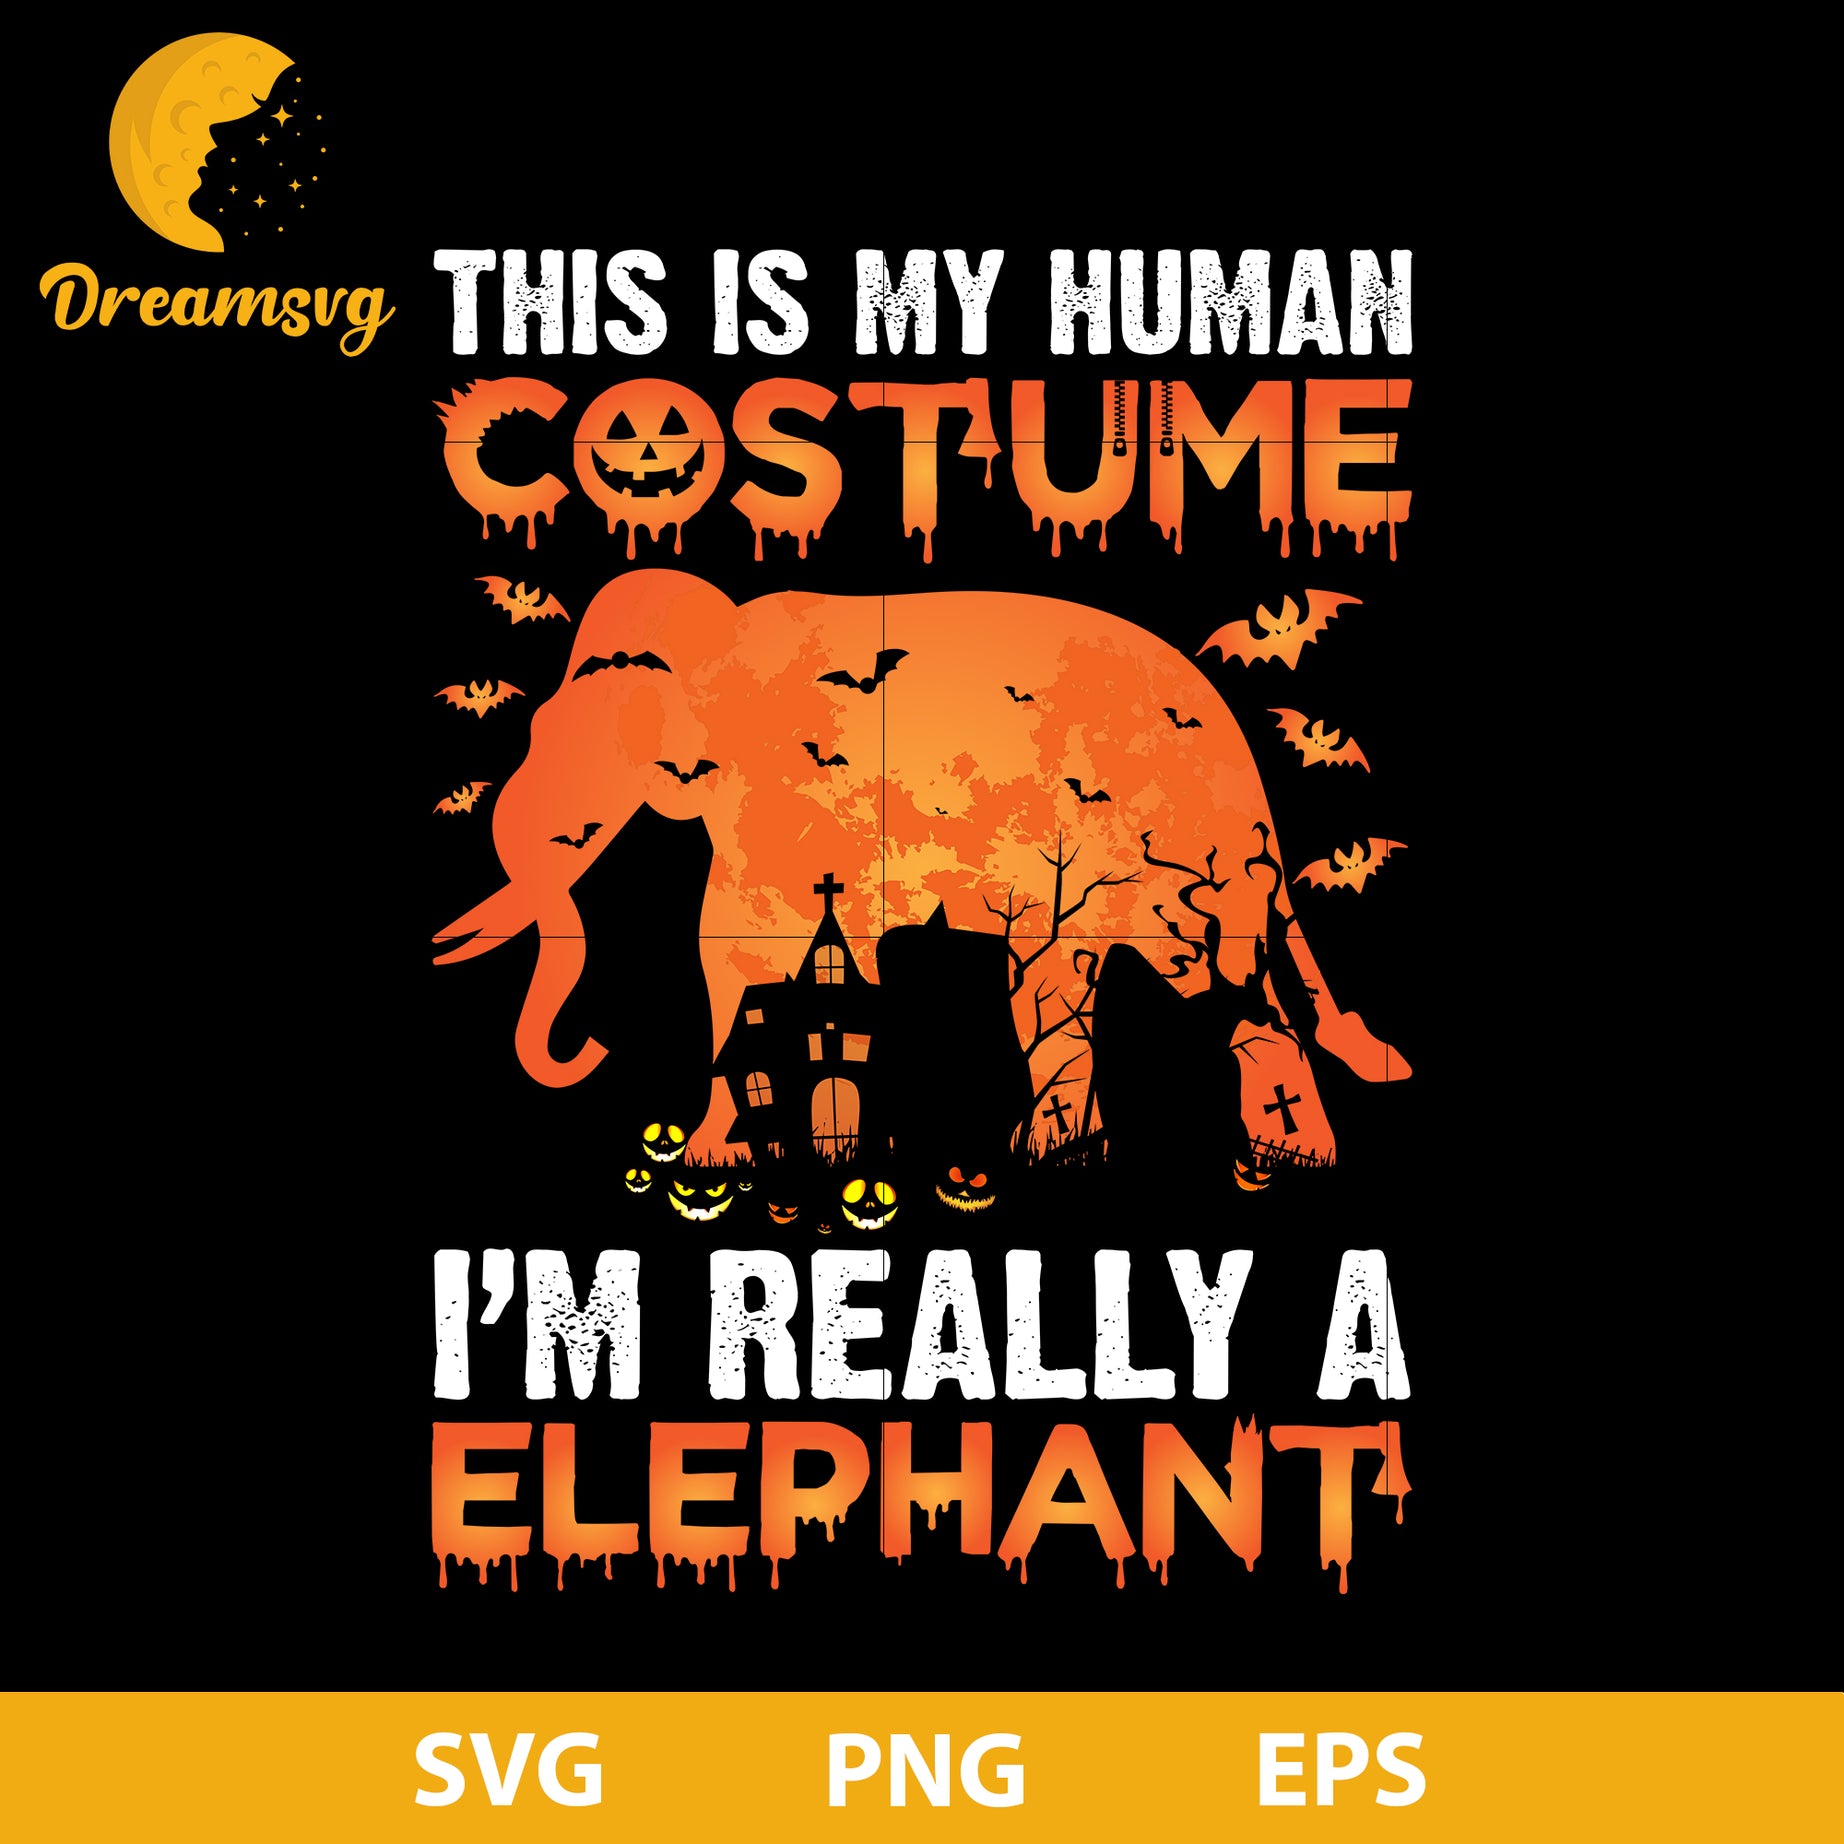 This Is My Human Costume I'm Really a Elephant svg, Halloween svg, png, dxf, eps digital file.